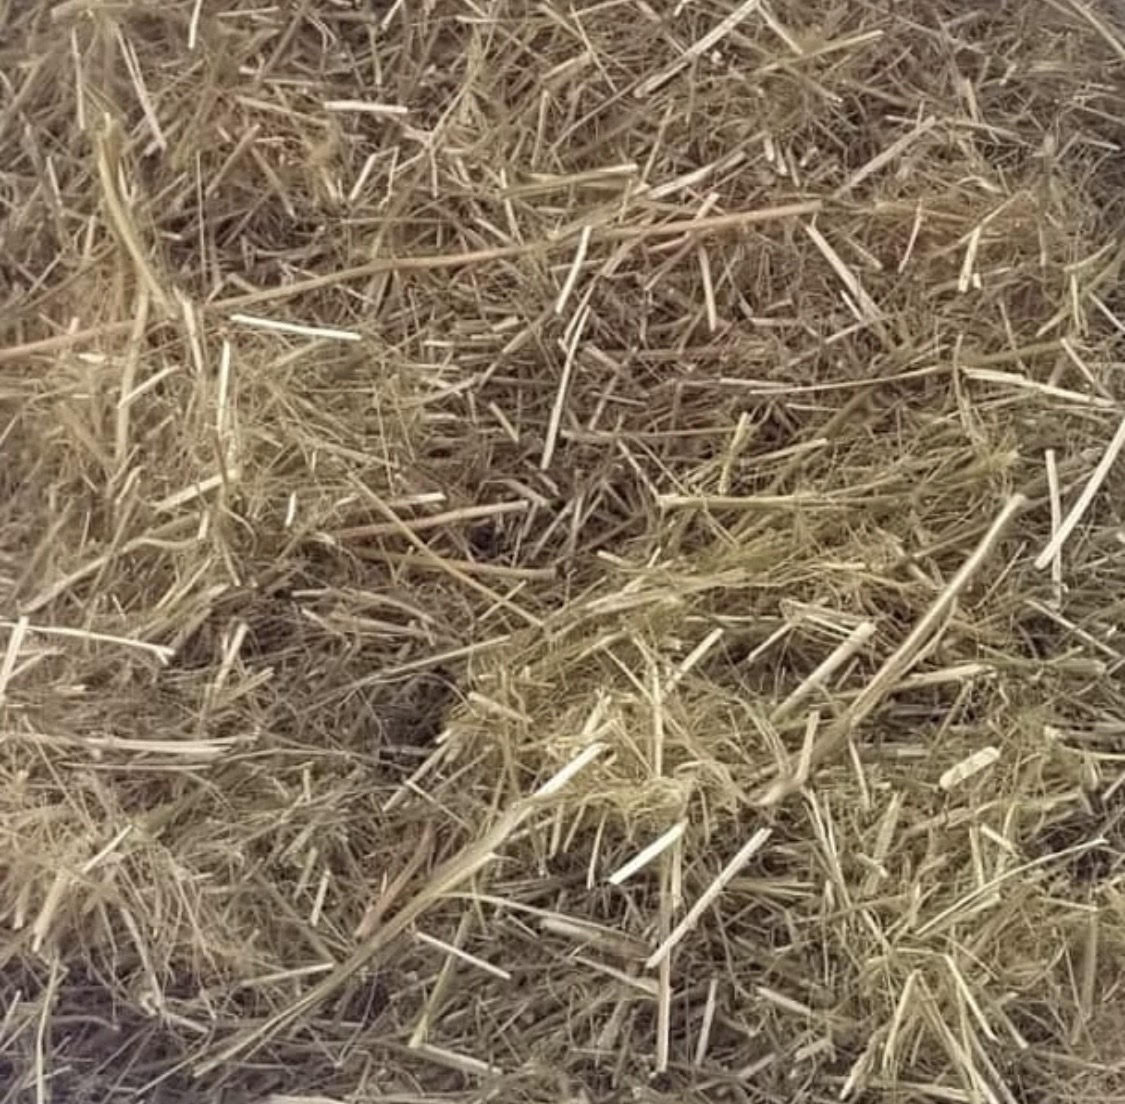 <img> Stems Removed from Threshed Hemp Plants